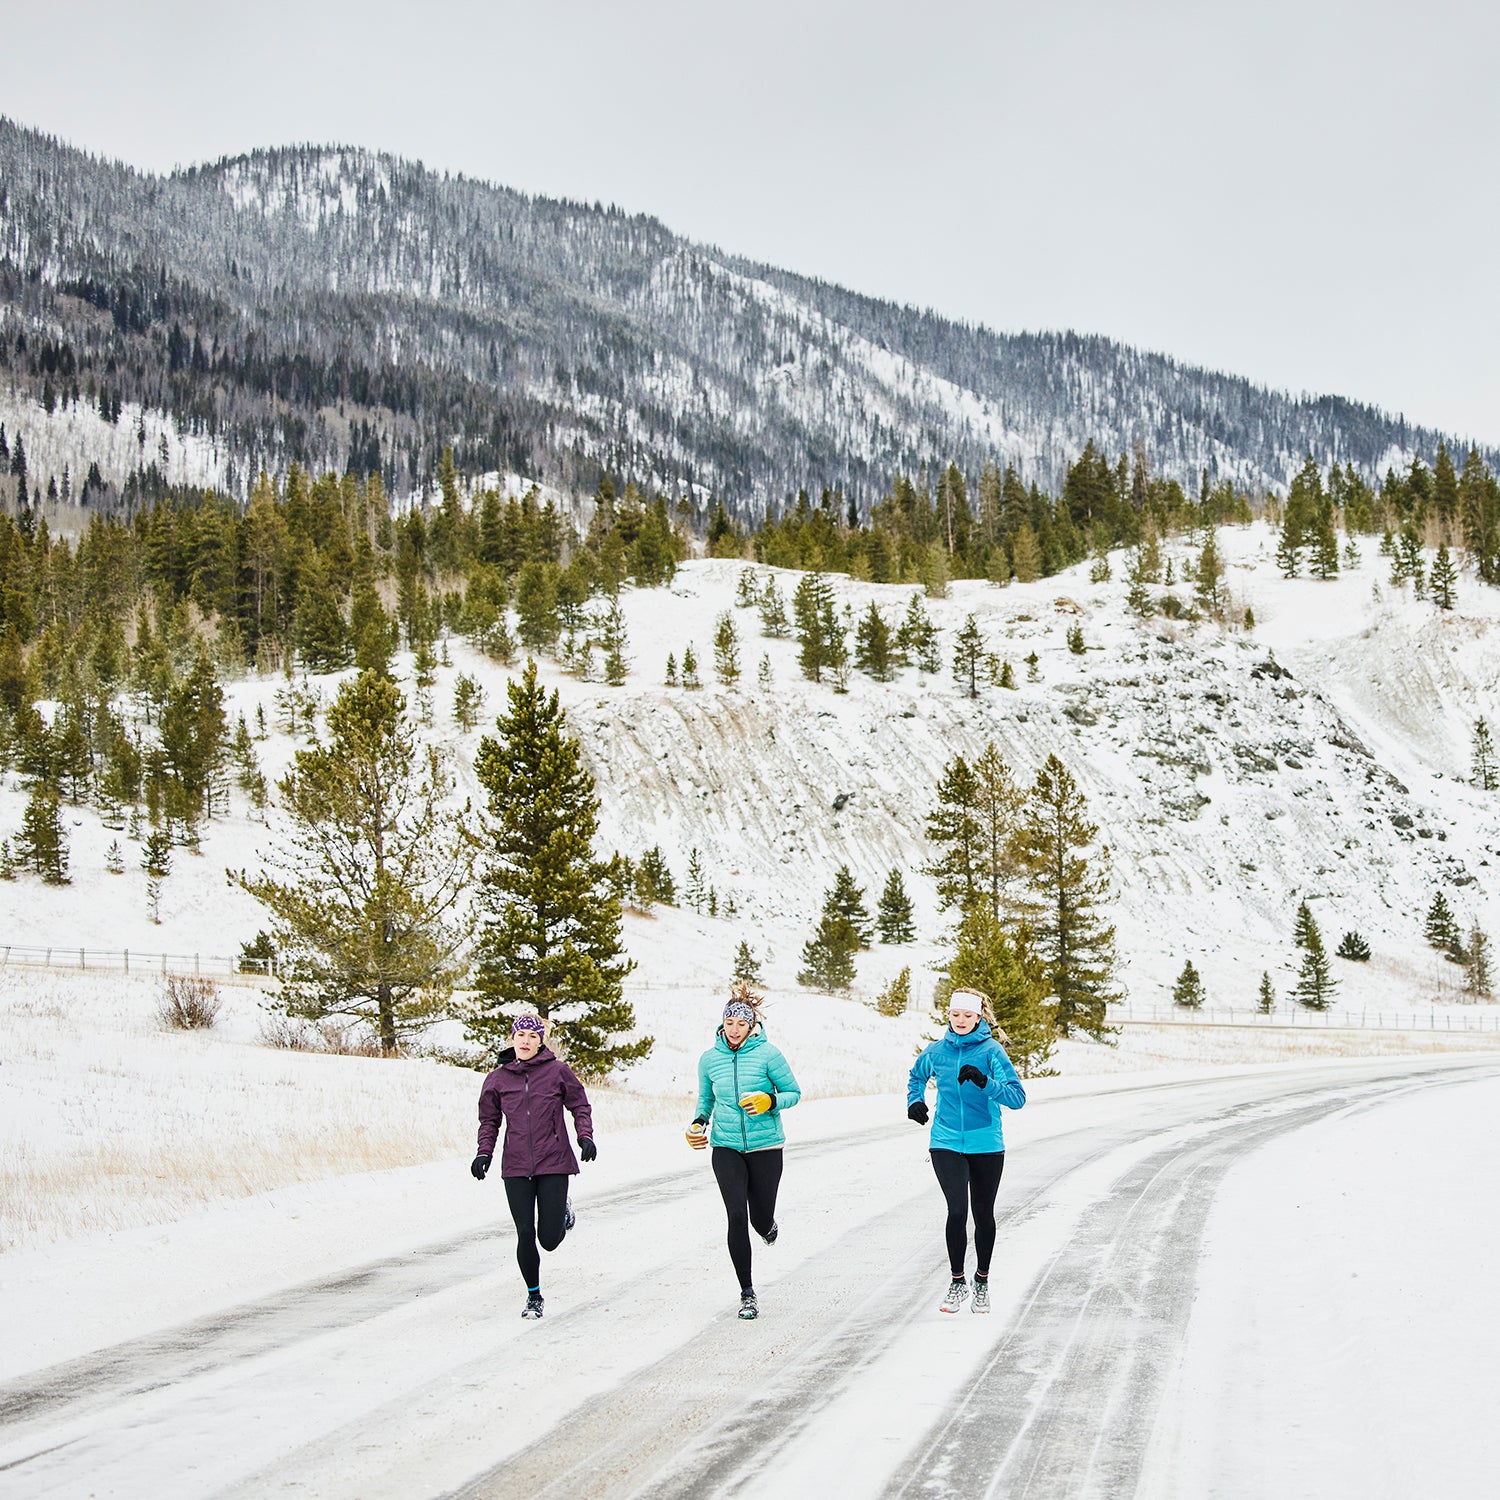 What's the ideal temperature for running? - Canadian Running Magazine